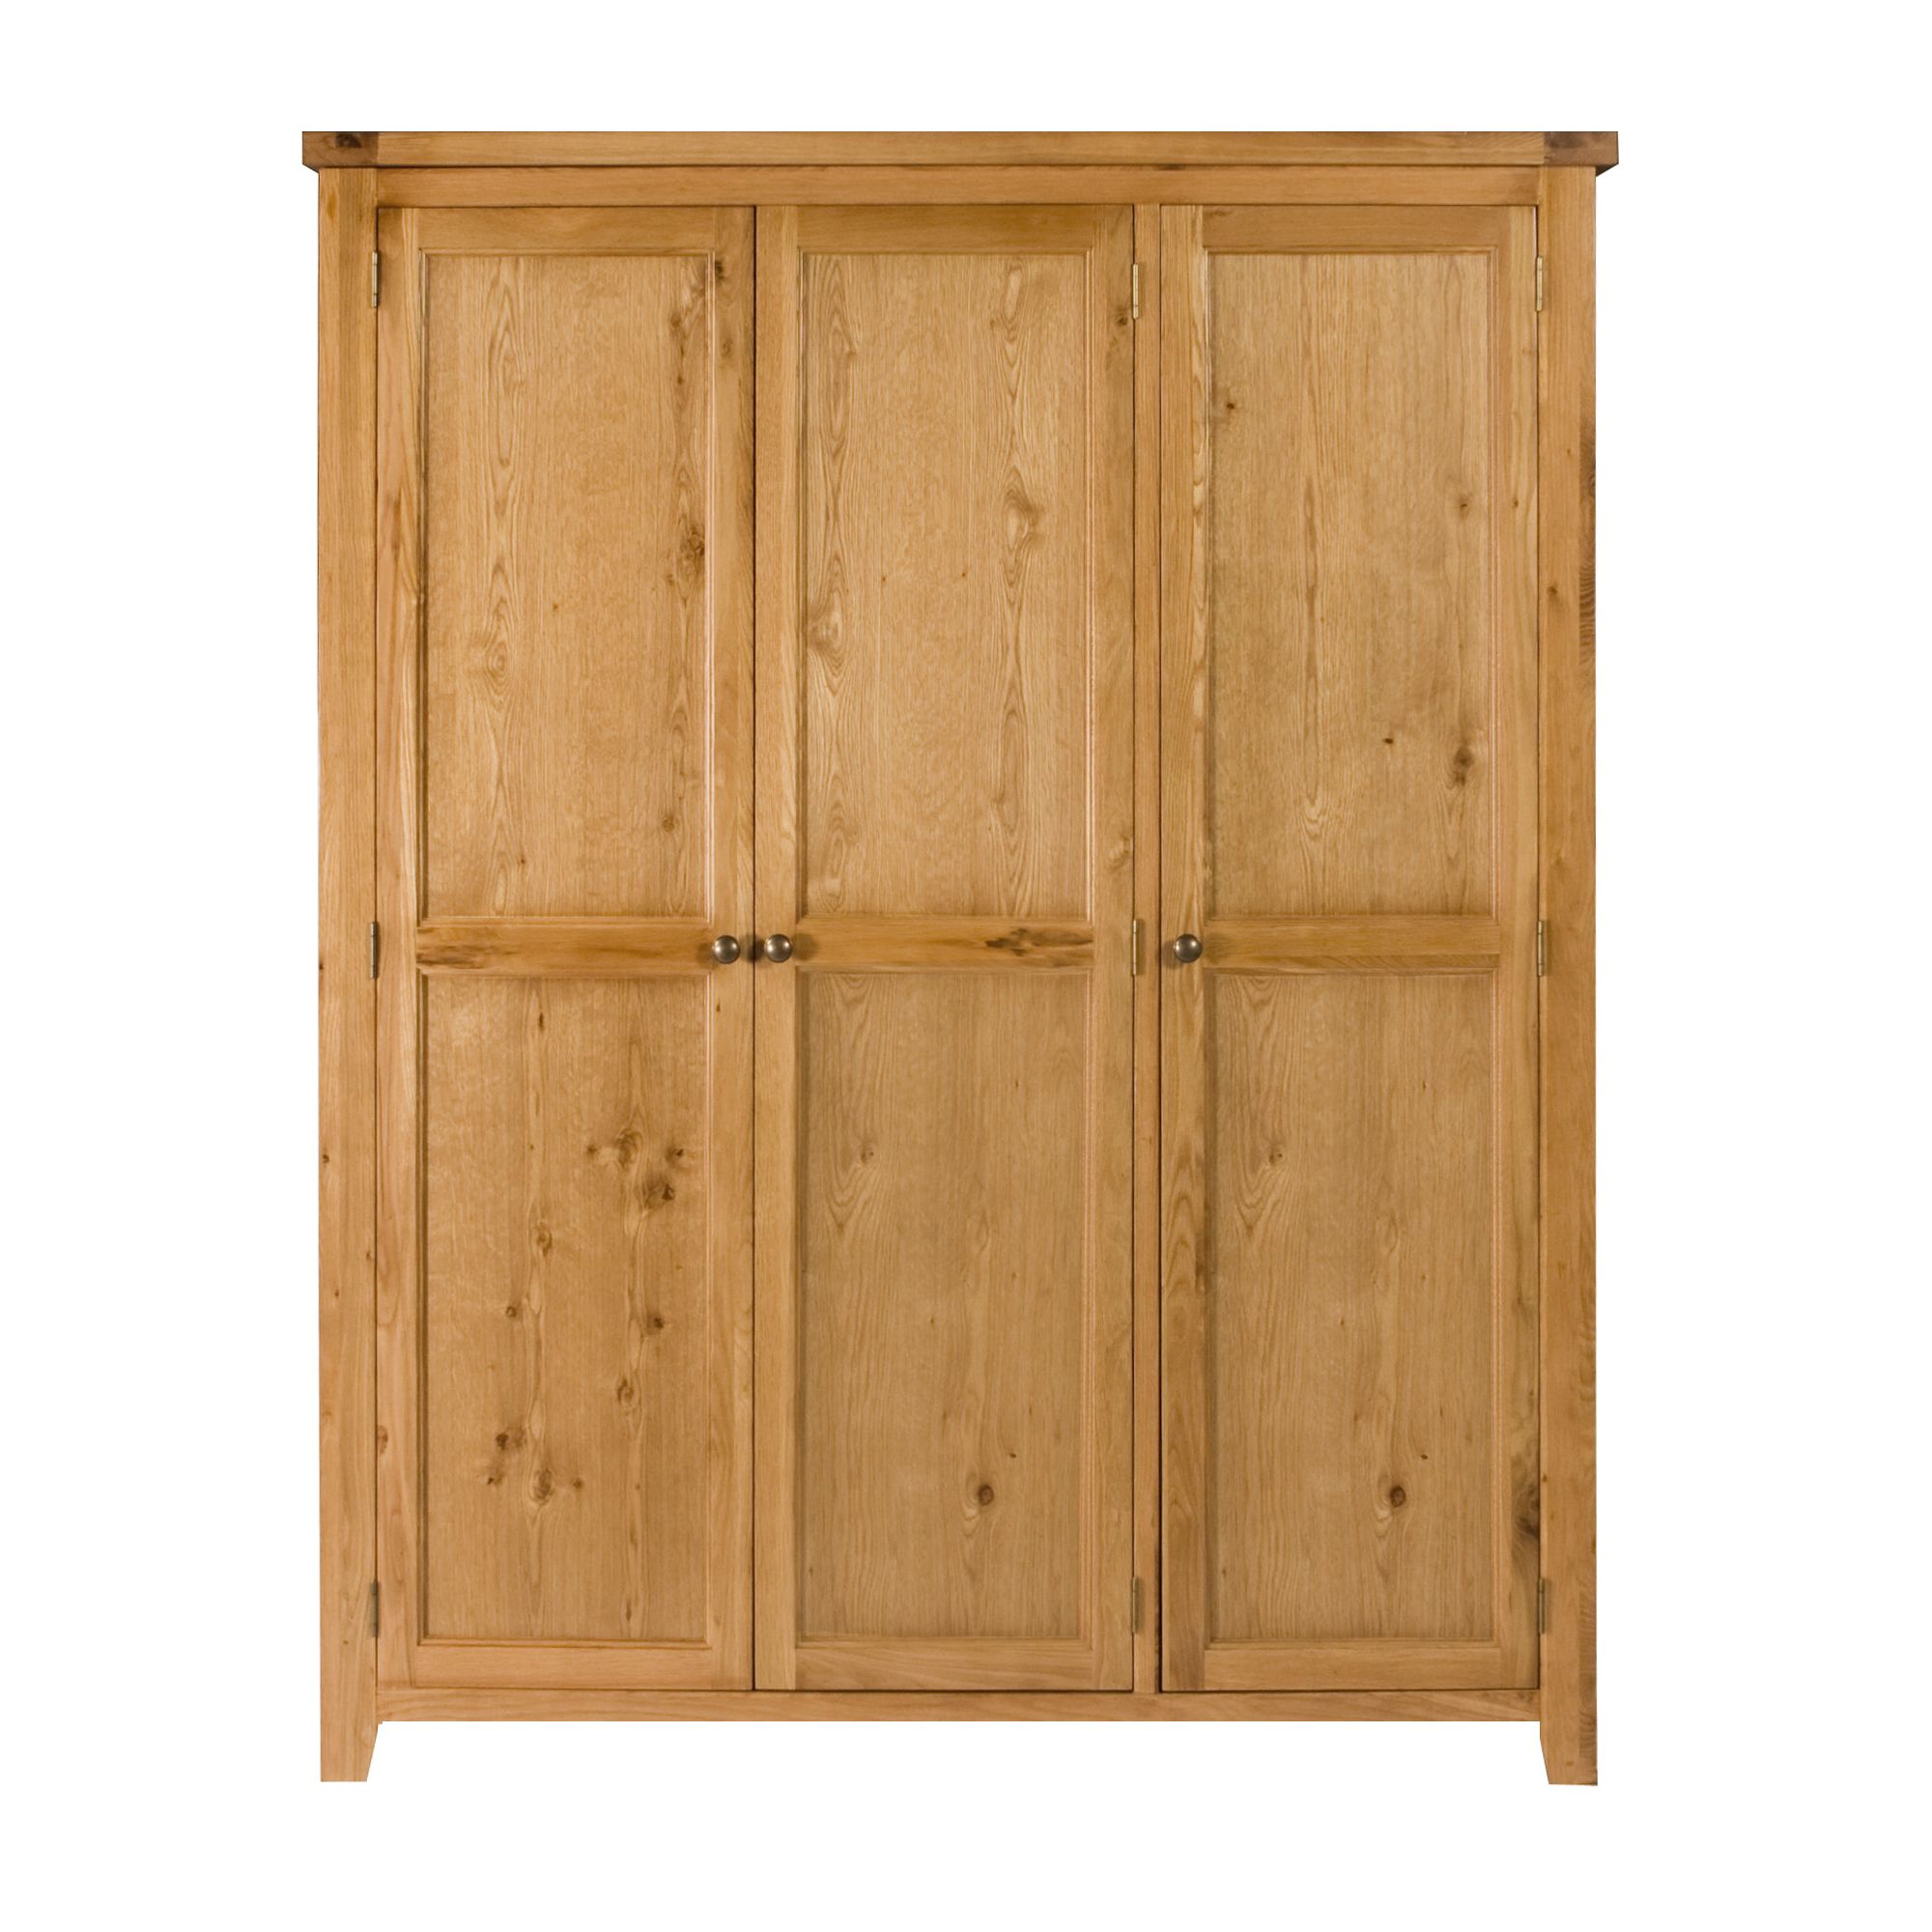 Elements Ludmilla Three Door All Hanging Wardrobe in Warm Lacquer at Tesco Direct